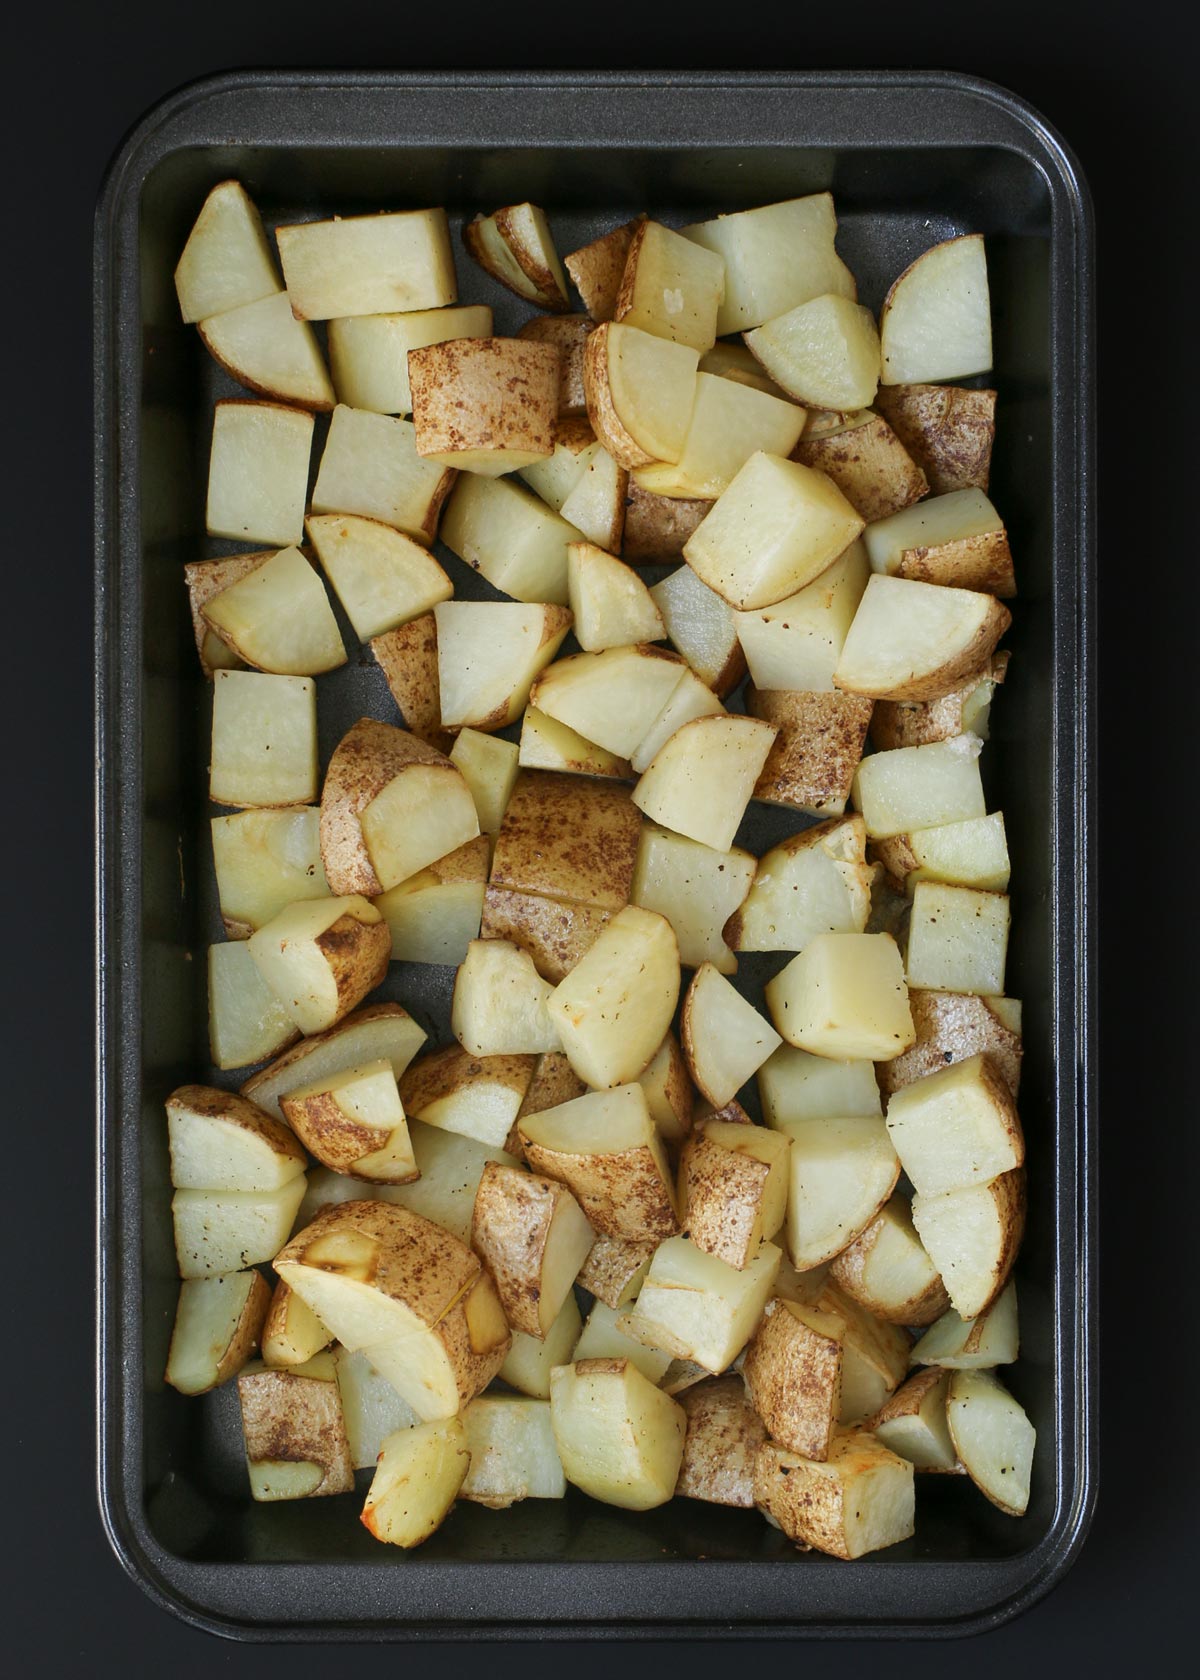 cooked potato cubes laid out in small baking pan.